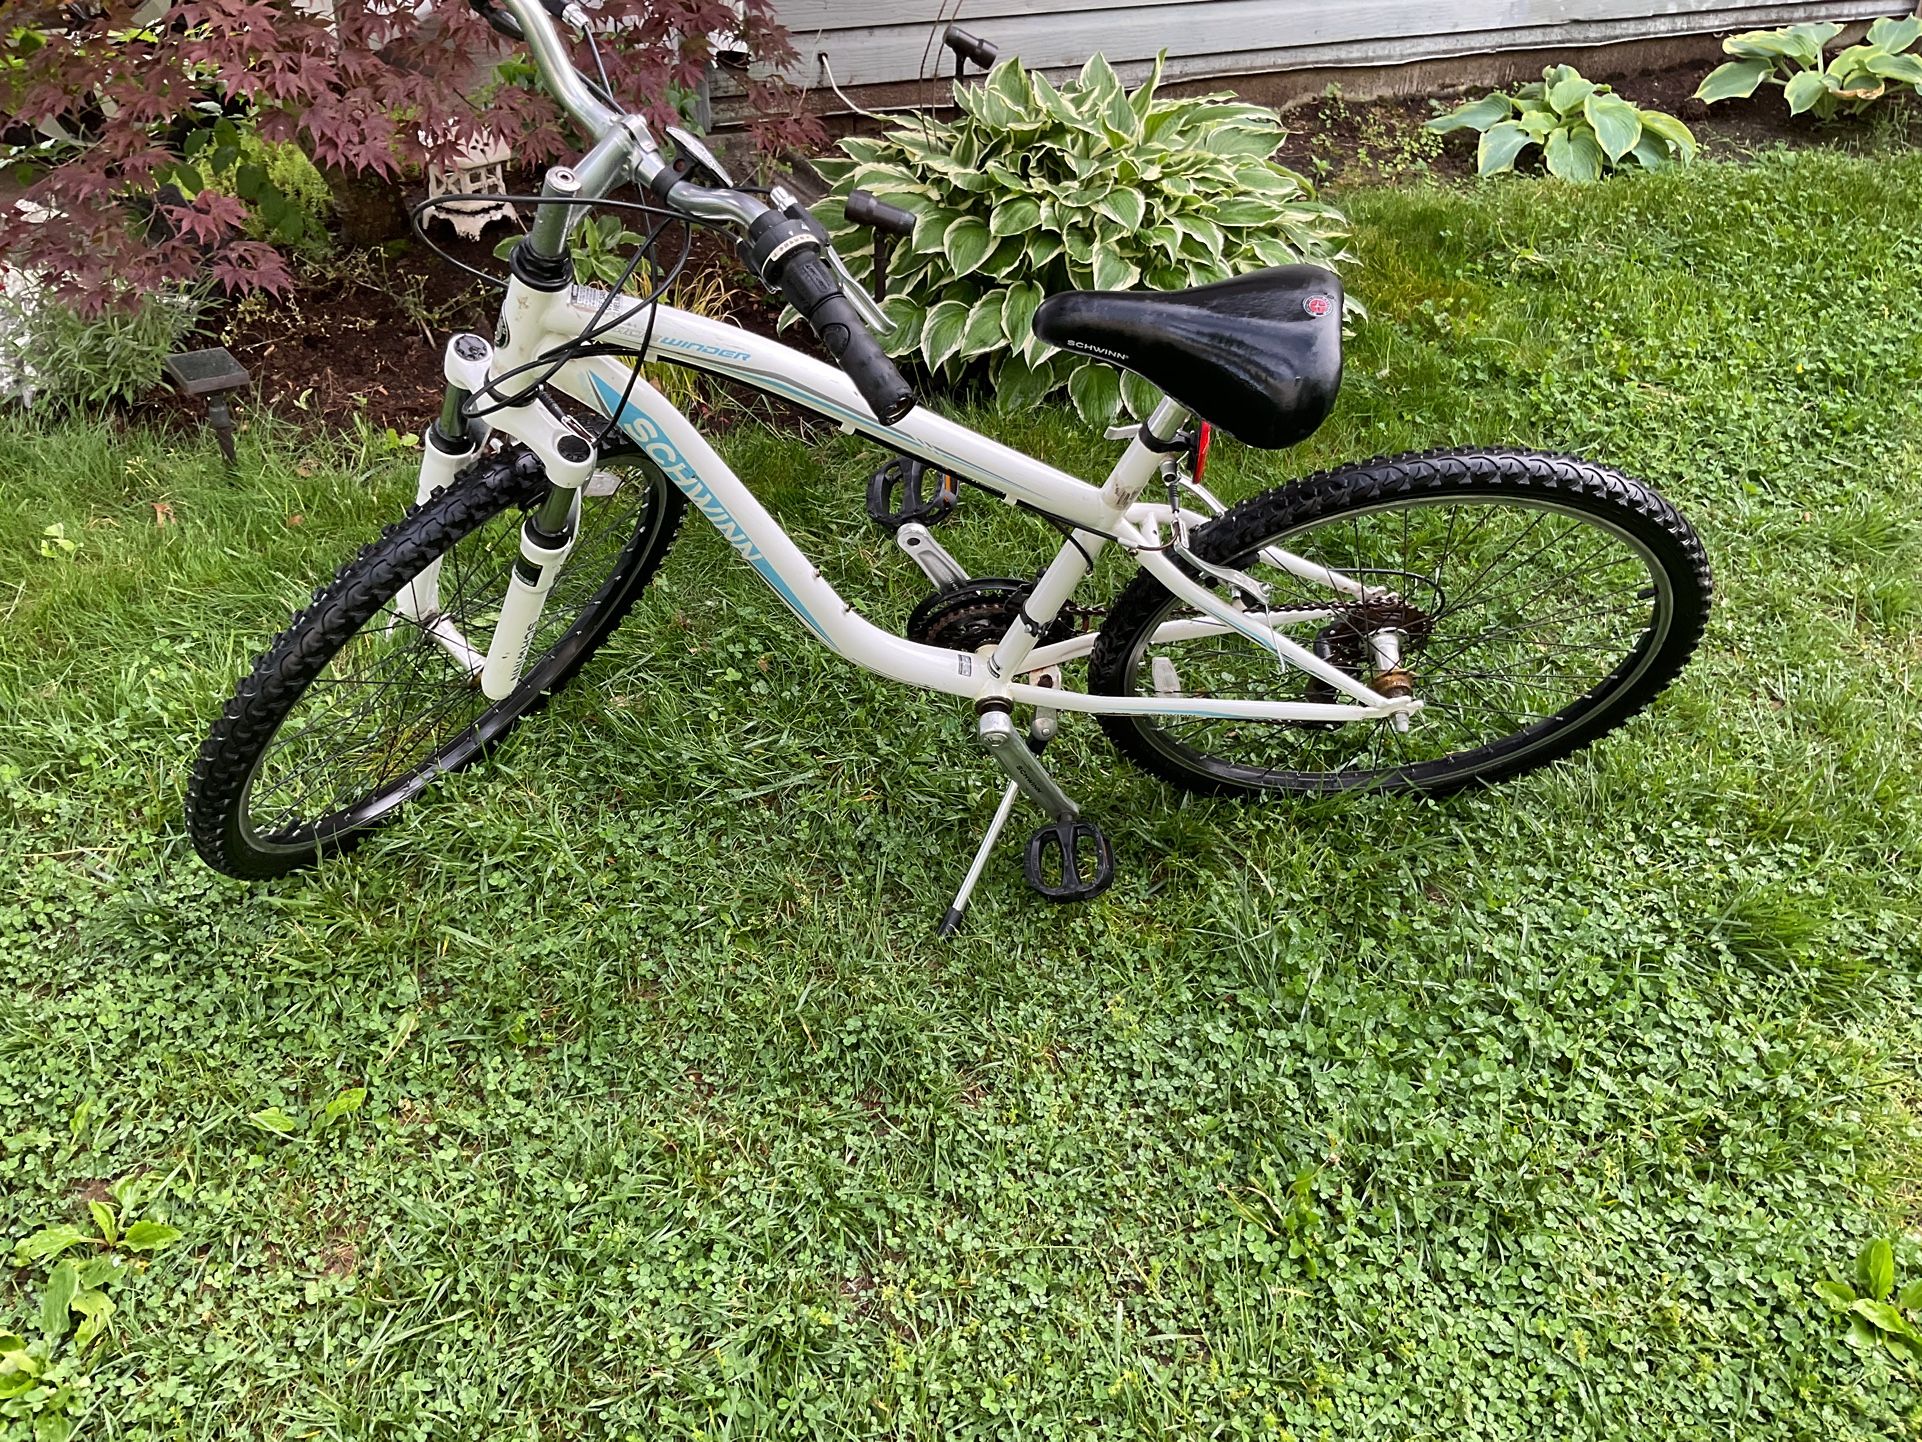 A Nice Schwinn Bike In Pretty Good Conditions, Good For The Summer (NO SHIPPING)